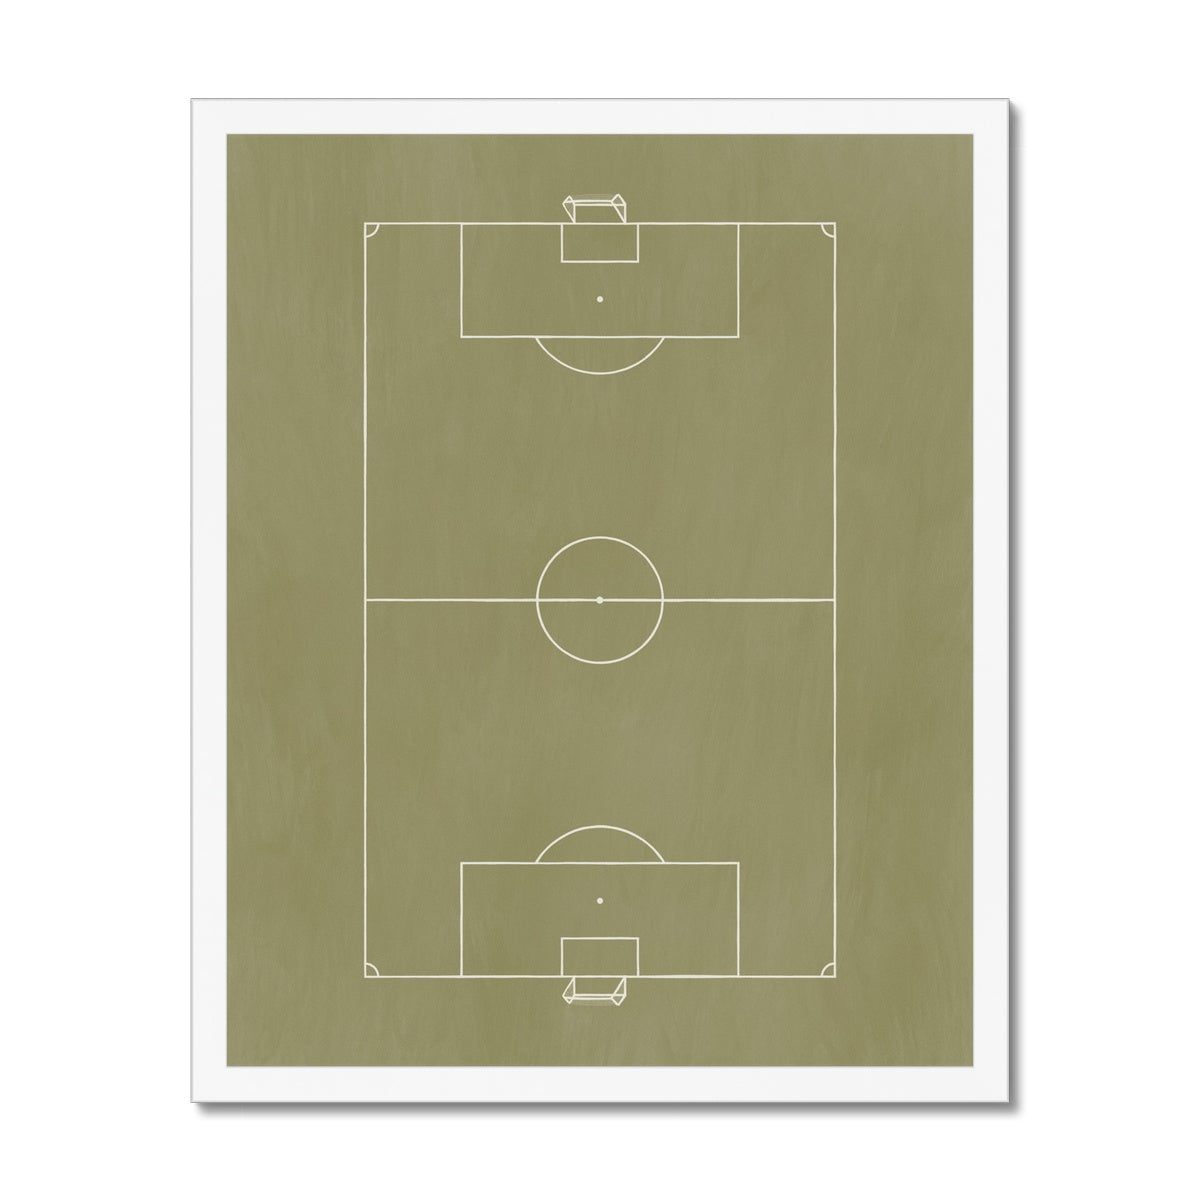 Football pitch in green / Framed Print